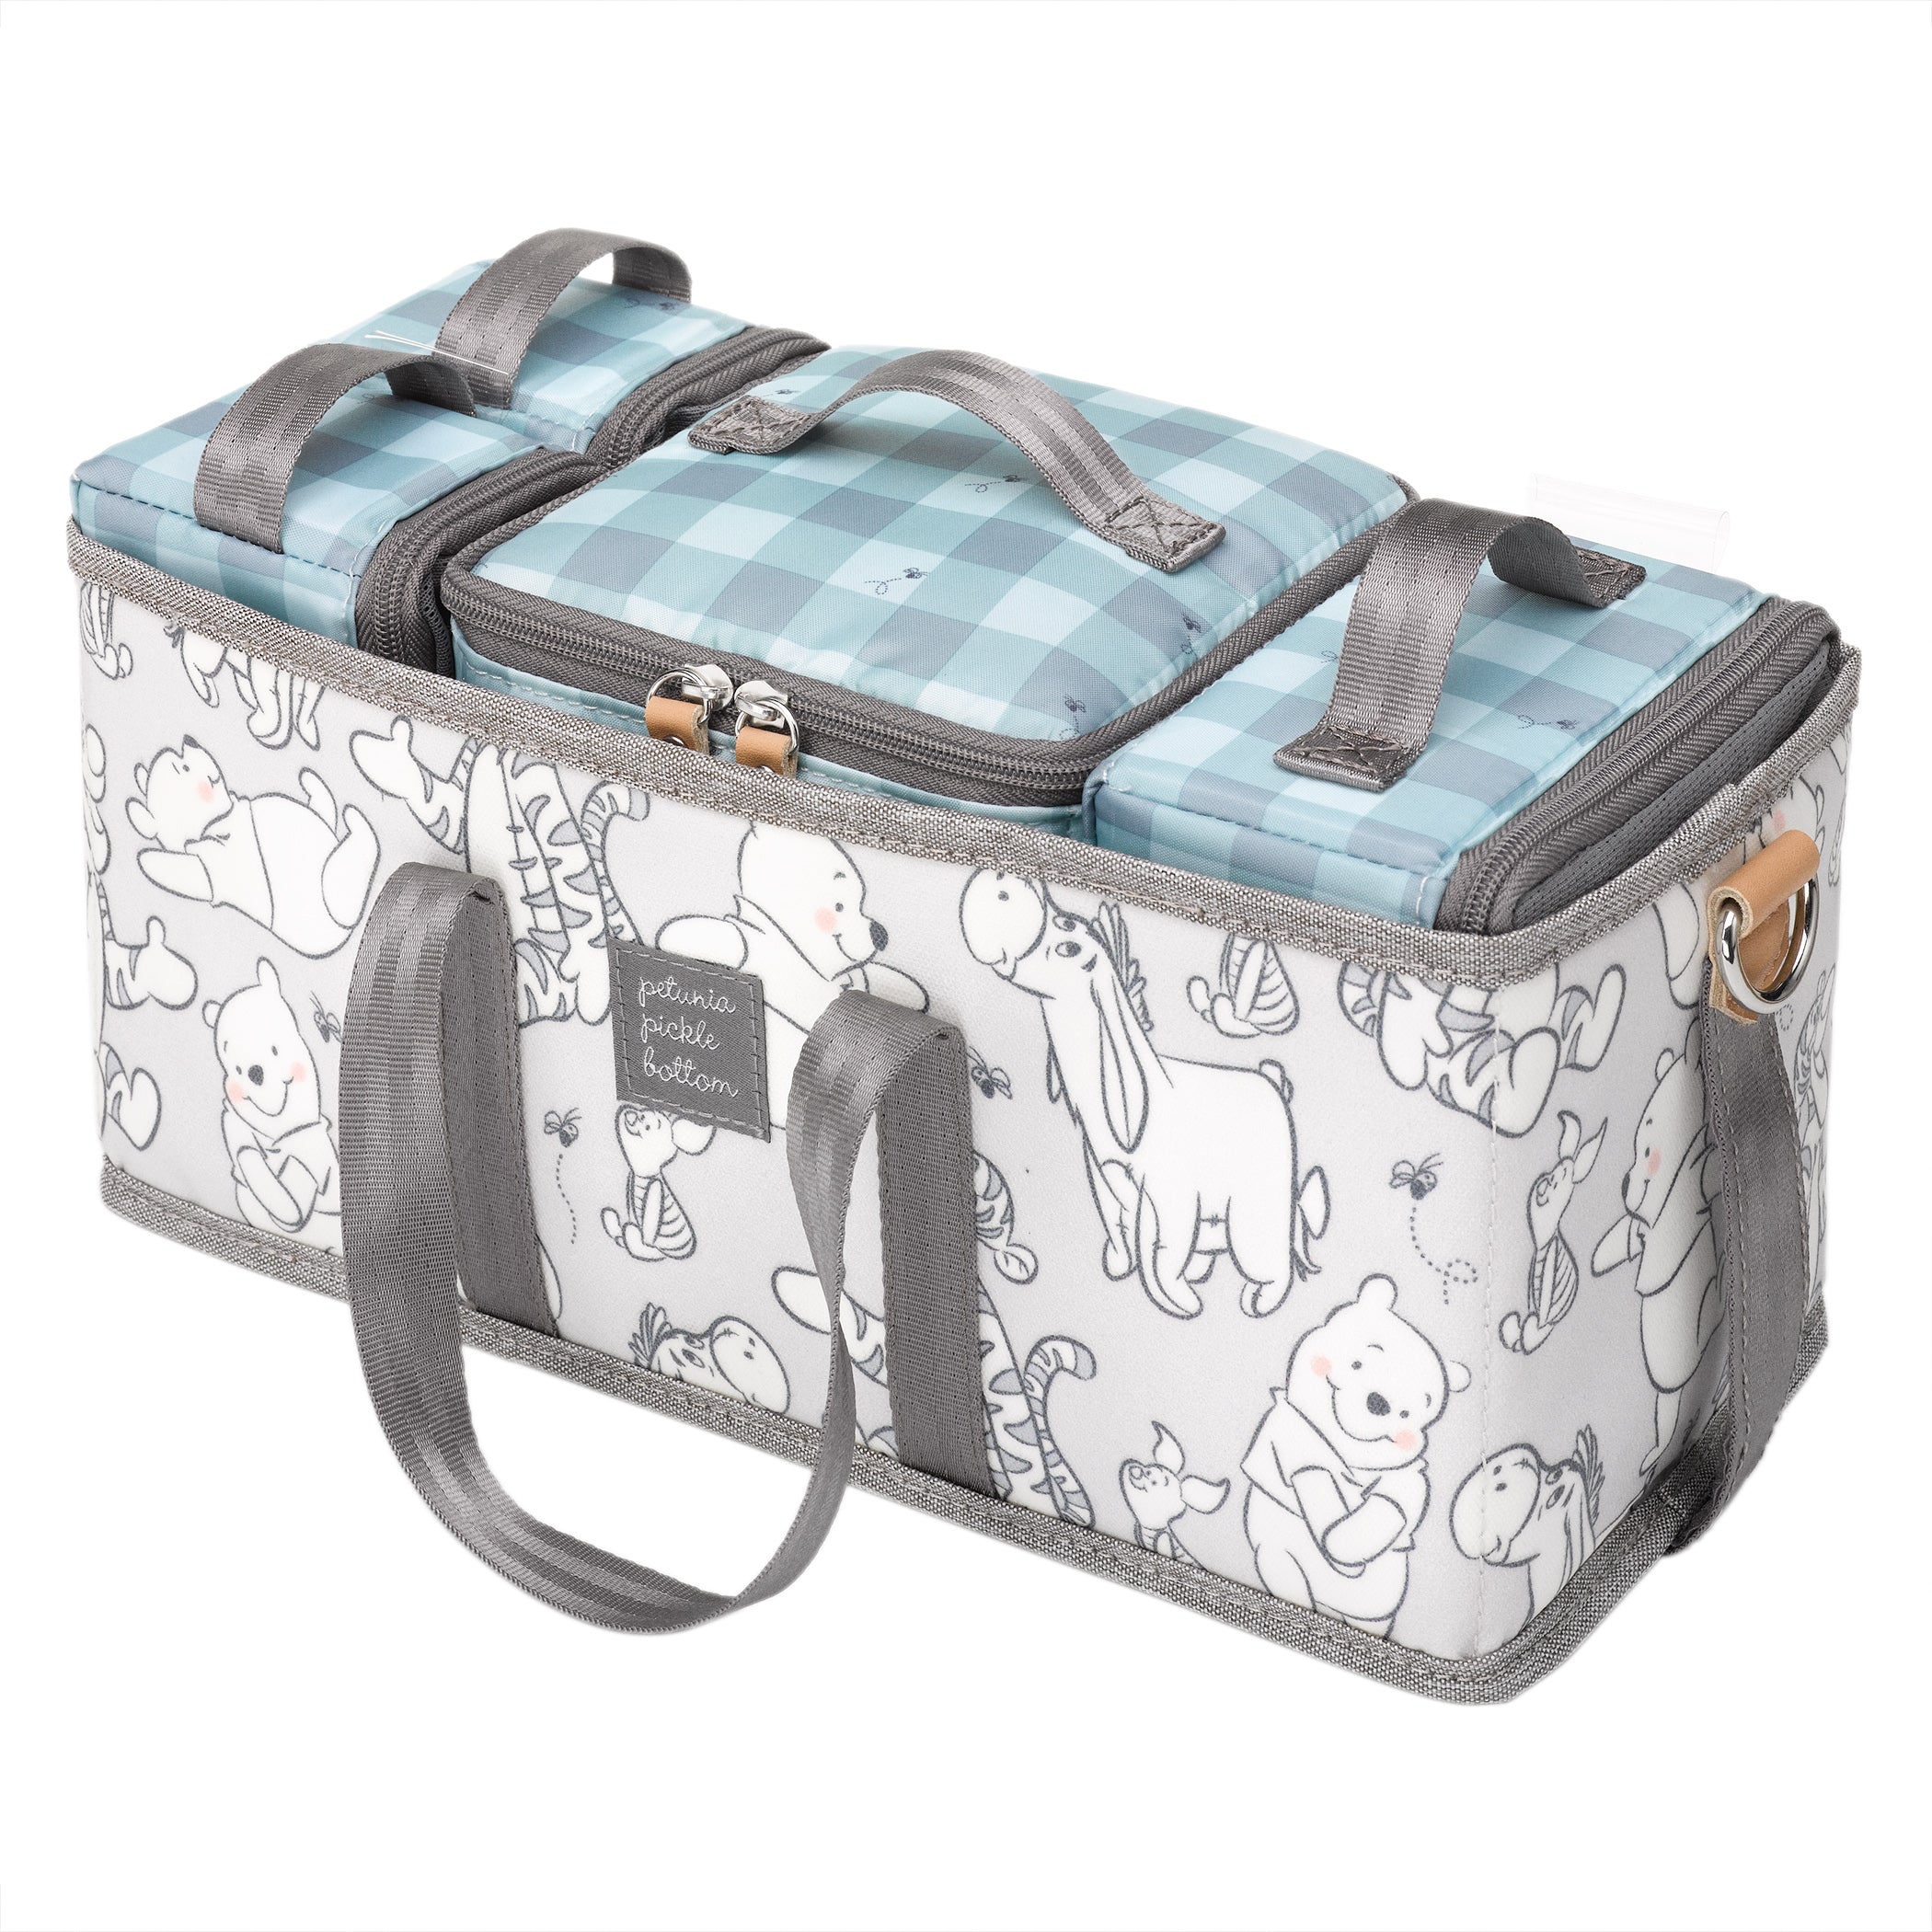 Petunia Pickle Bottom Inter-Mix Deluxe Kit in Disney's Playful Pooh Diaper Caddie